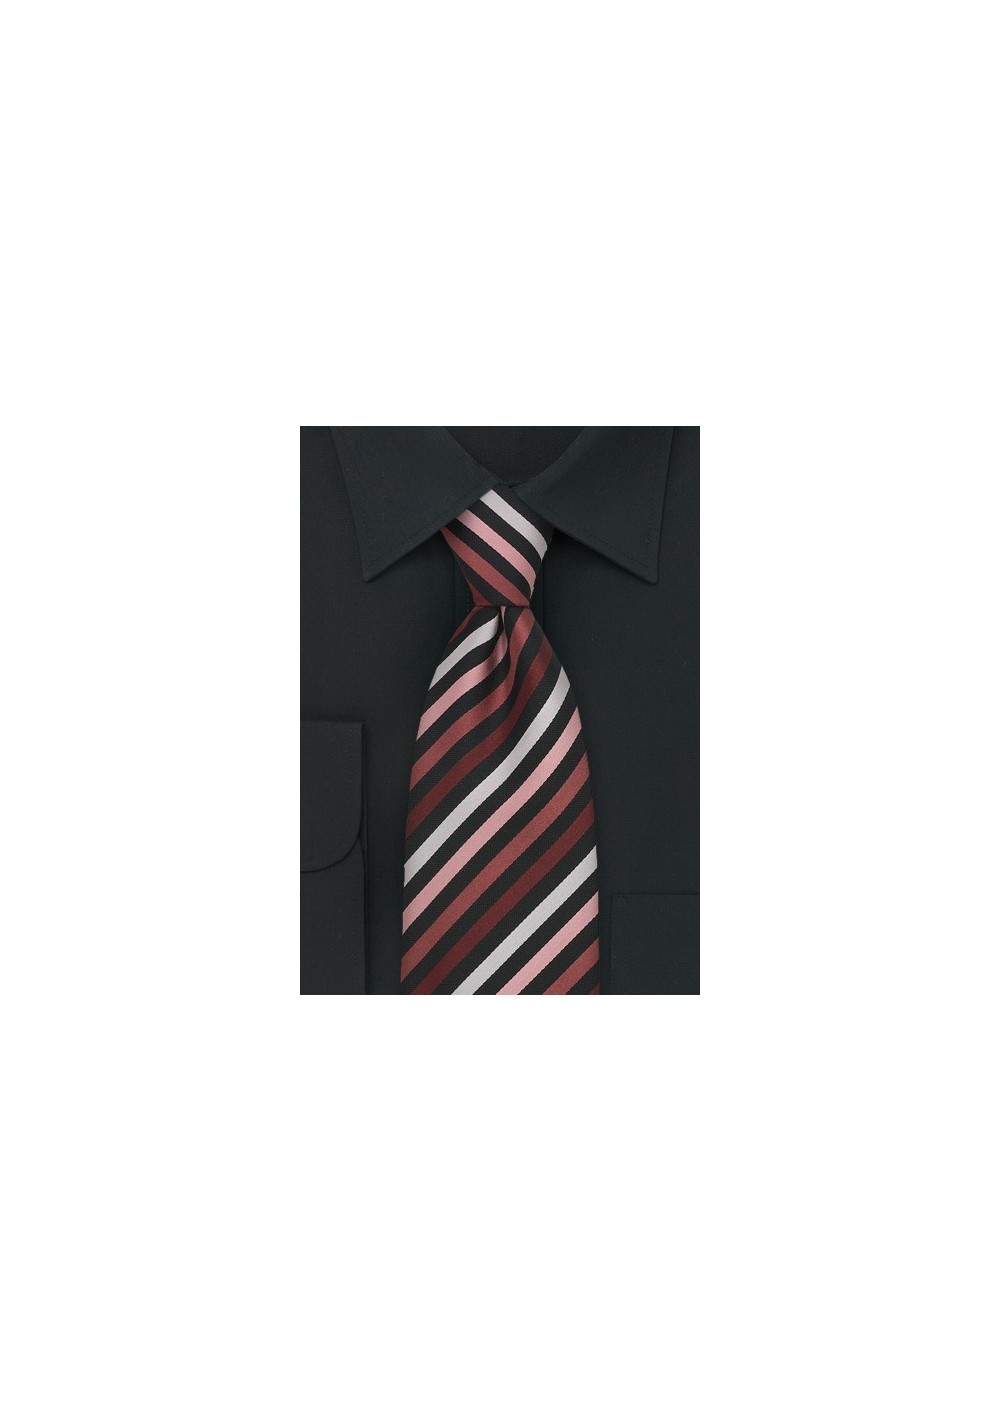 Modern Striped Tie in White, Black, Pink, and Coral